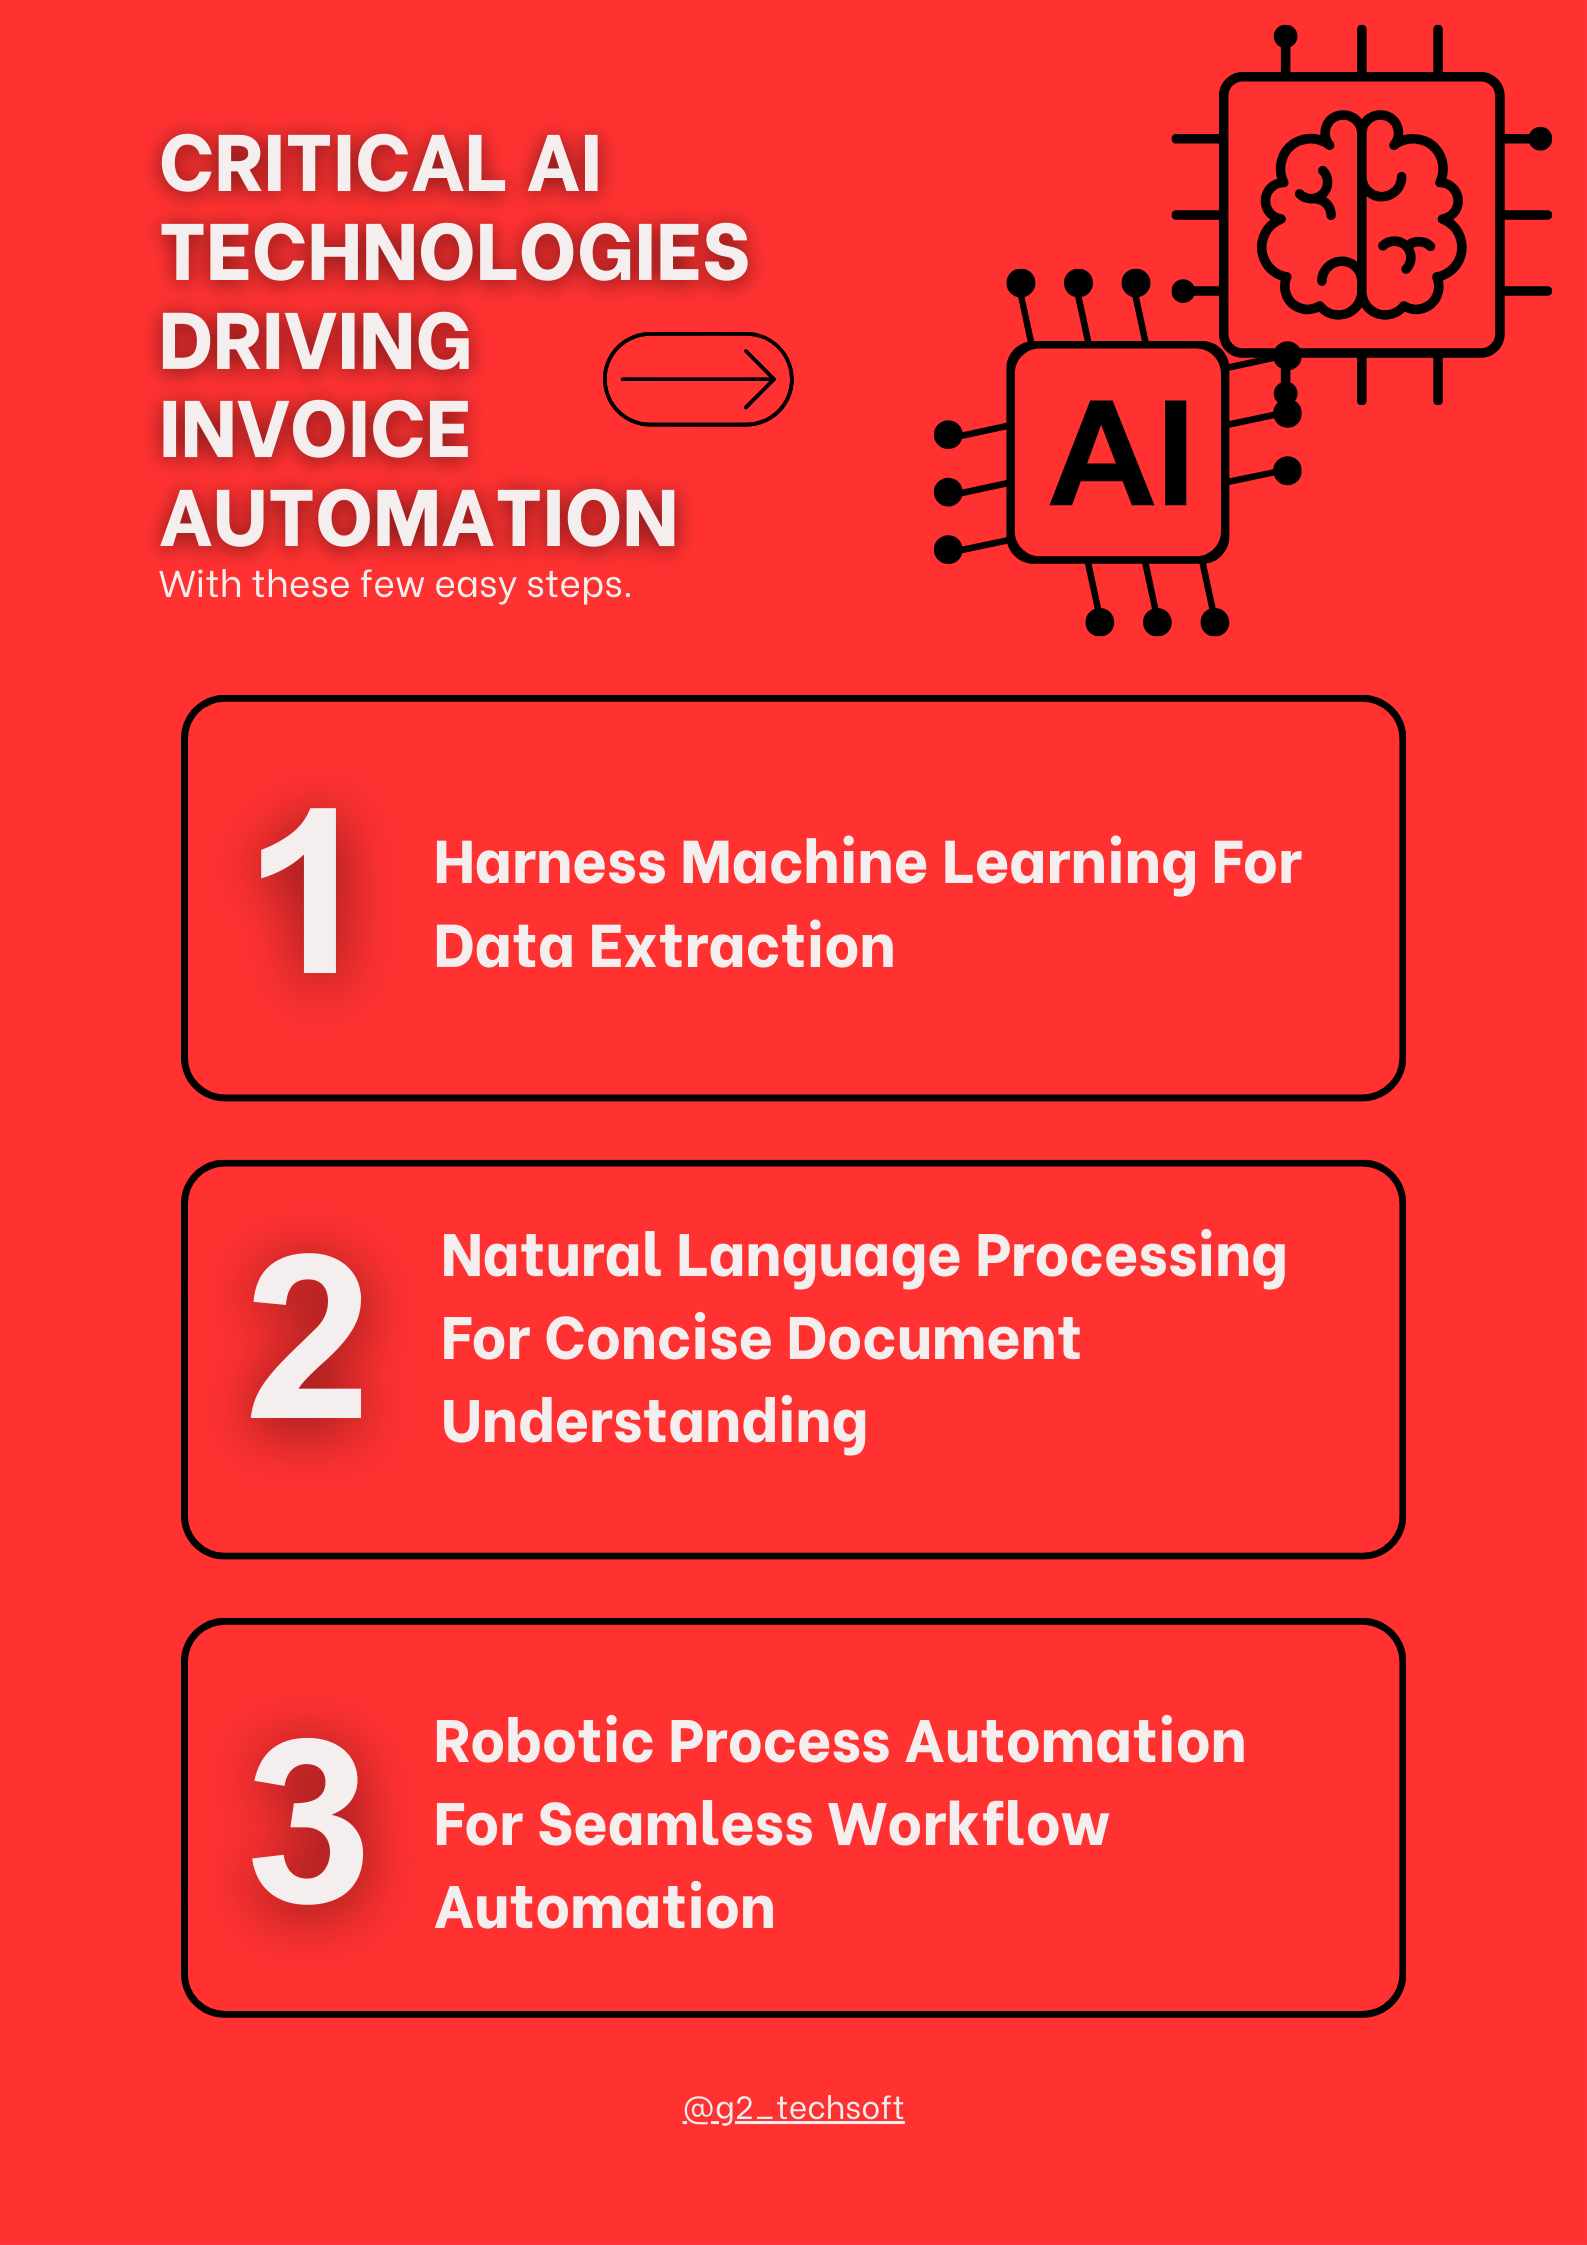 AI Technologies in Invoice Automation